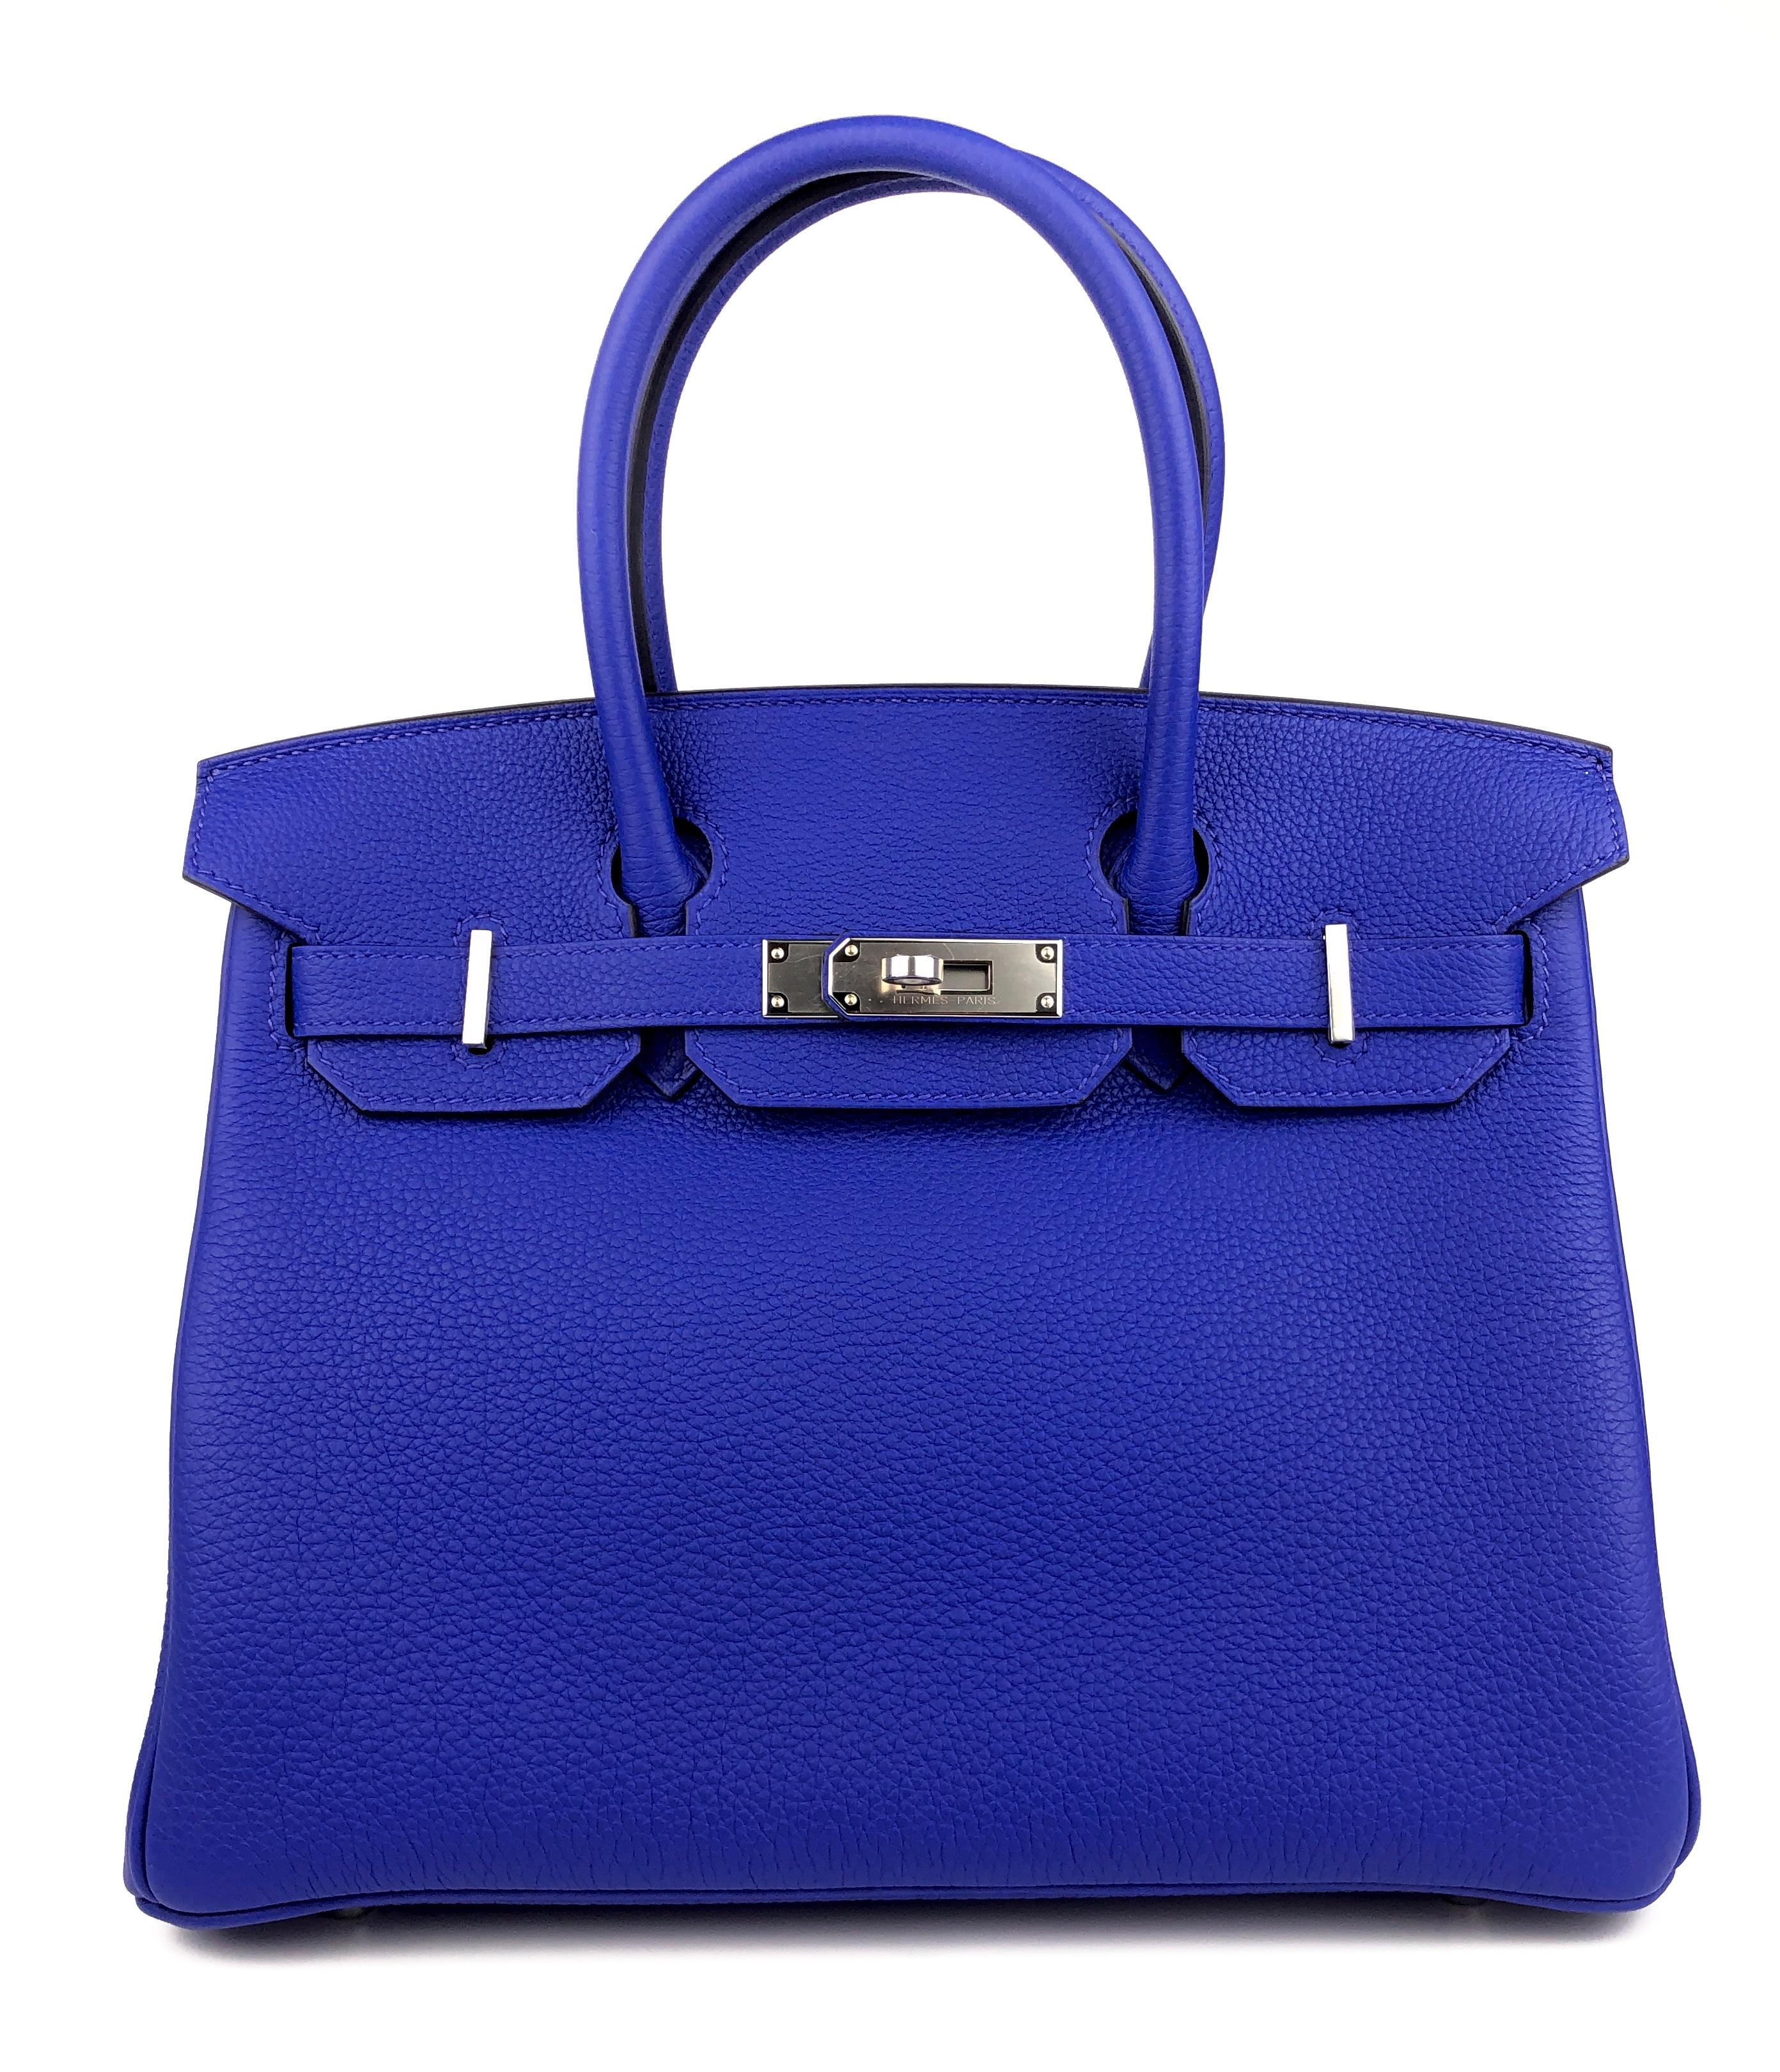 Rare NEW 2022 Hermes Birkin 30 Bleu Royal Leather Palladium Hardware . New U Stamp 2022. Includes all Accessories and box.

Shop with Confidence from Lux Addicts. Authenticity Guaranteed!
